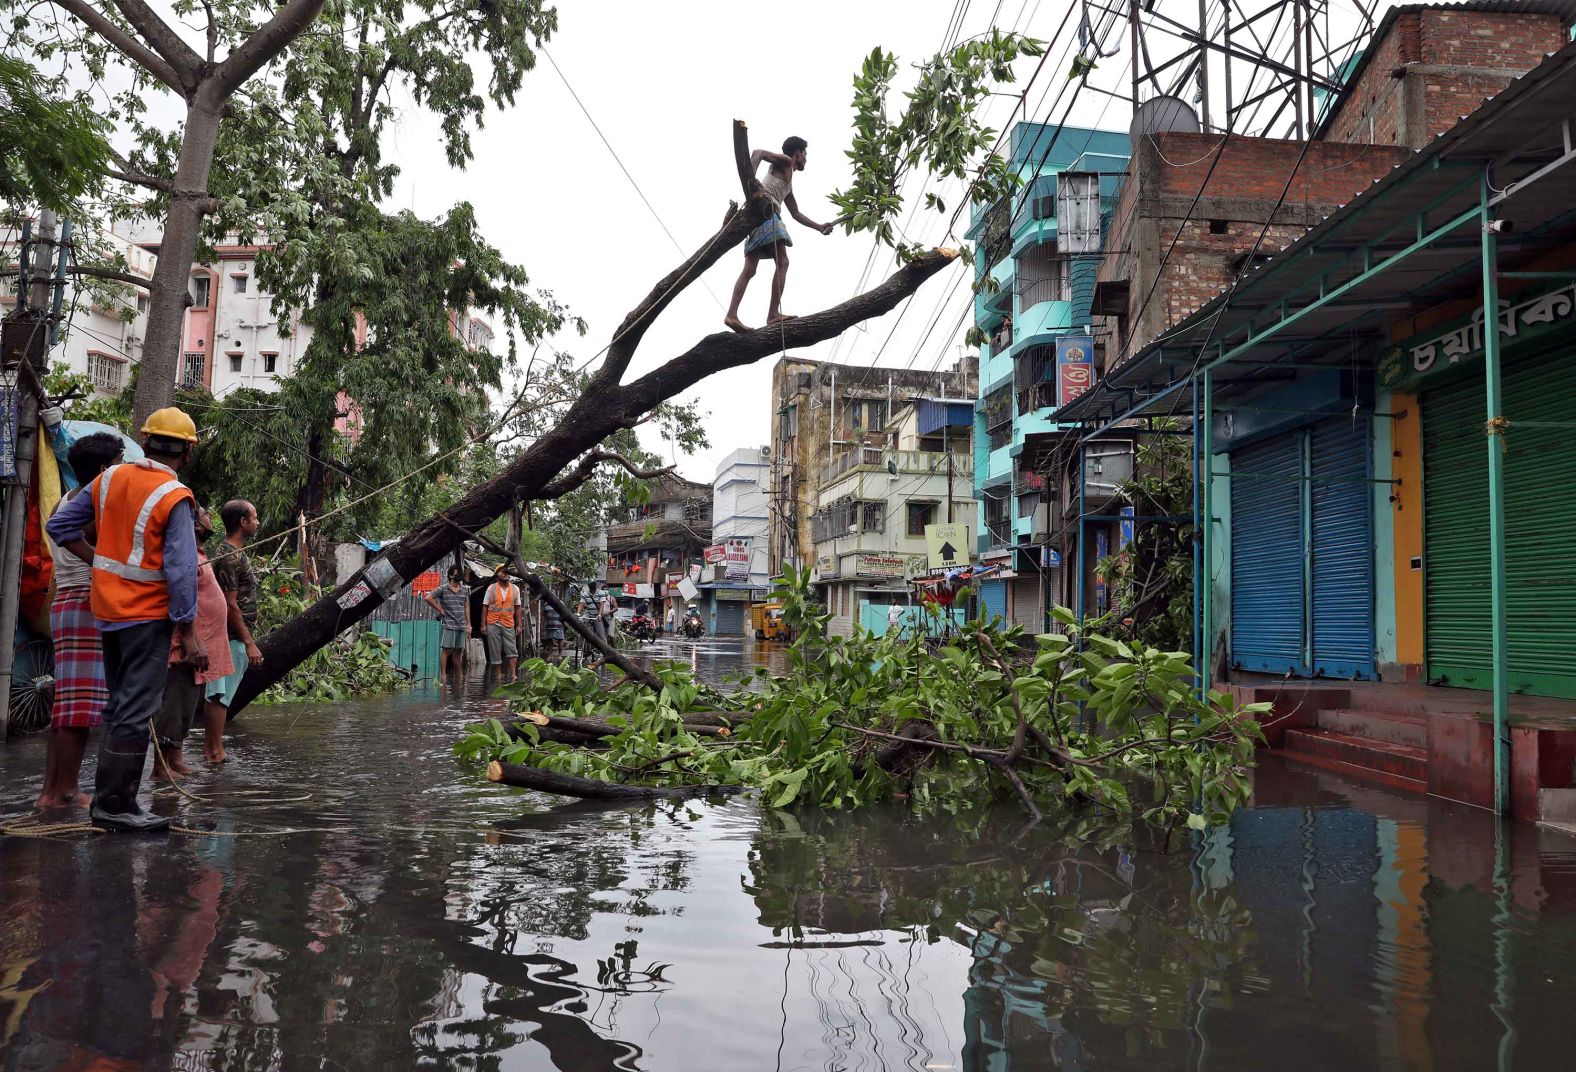 A man cuts branches from an uprooted tree in Kolkata on May 21.